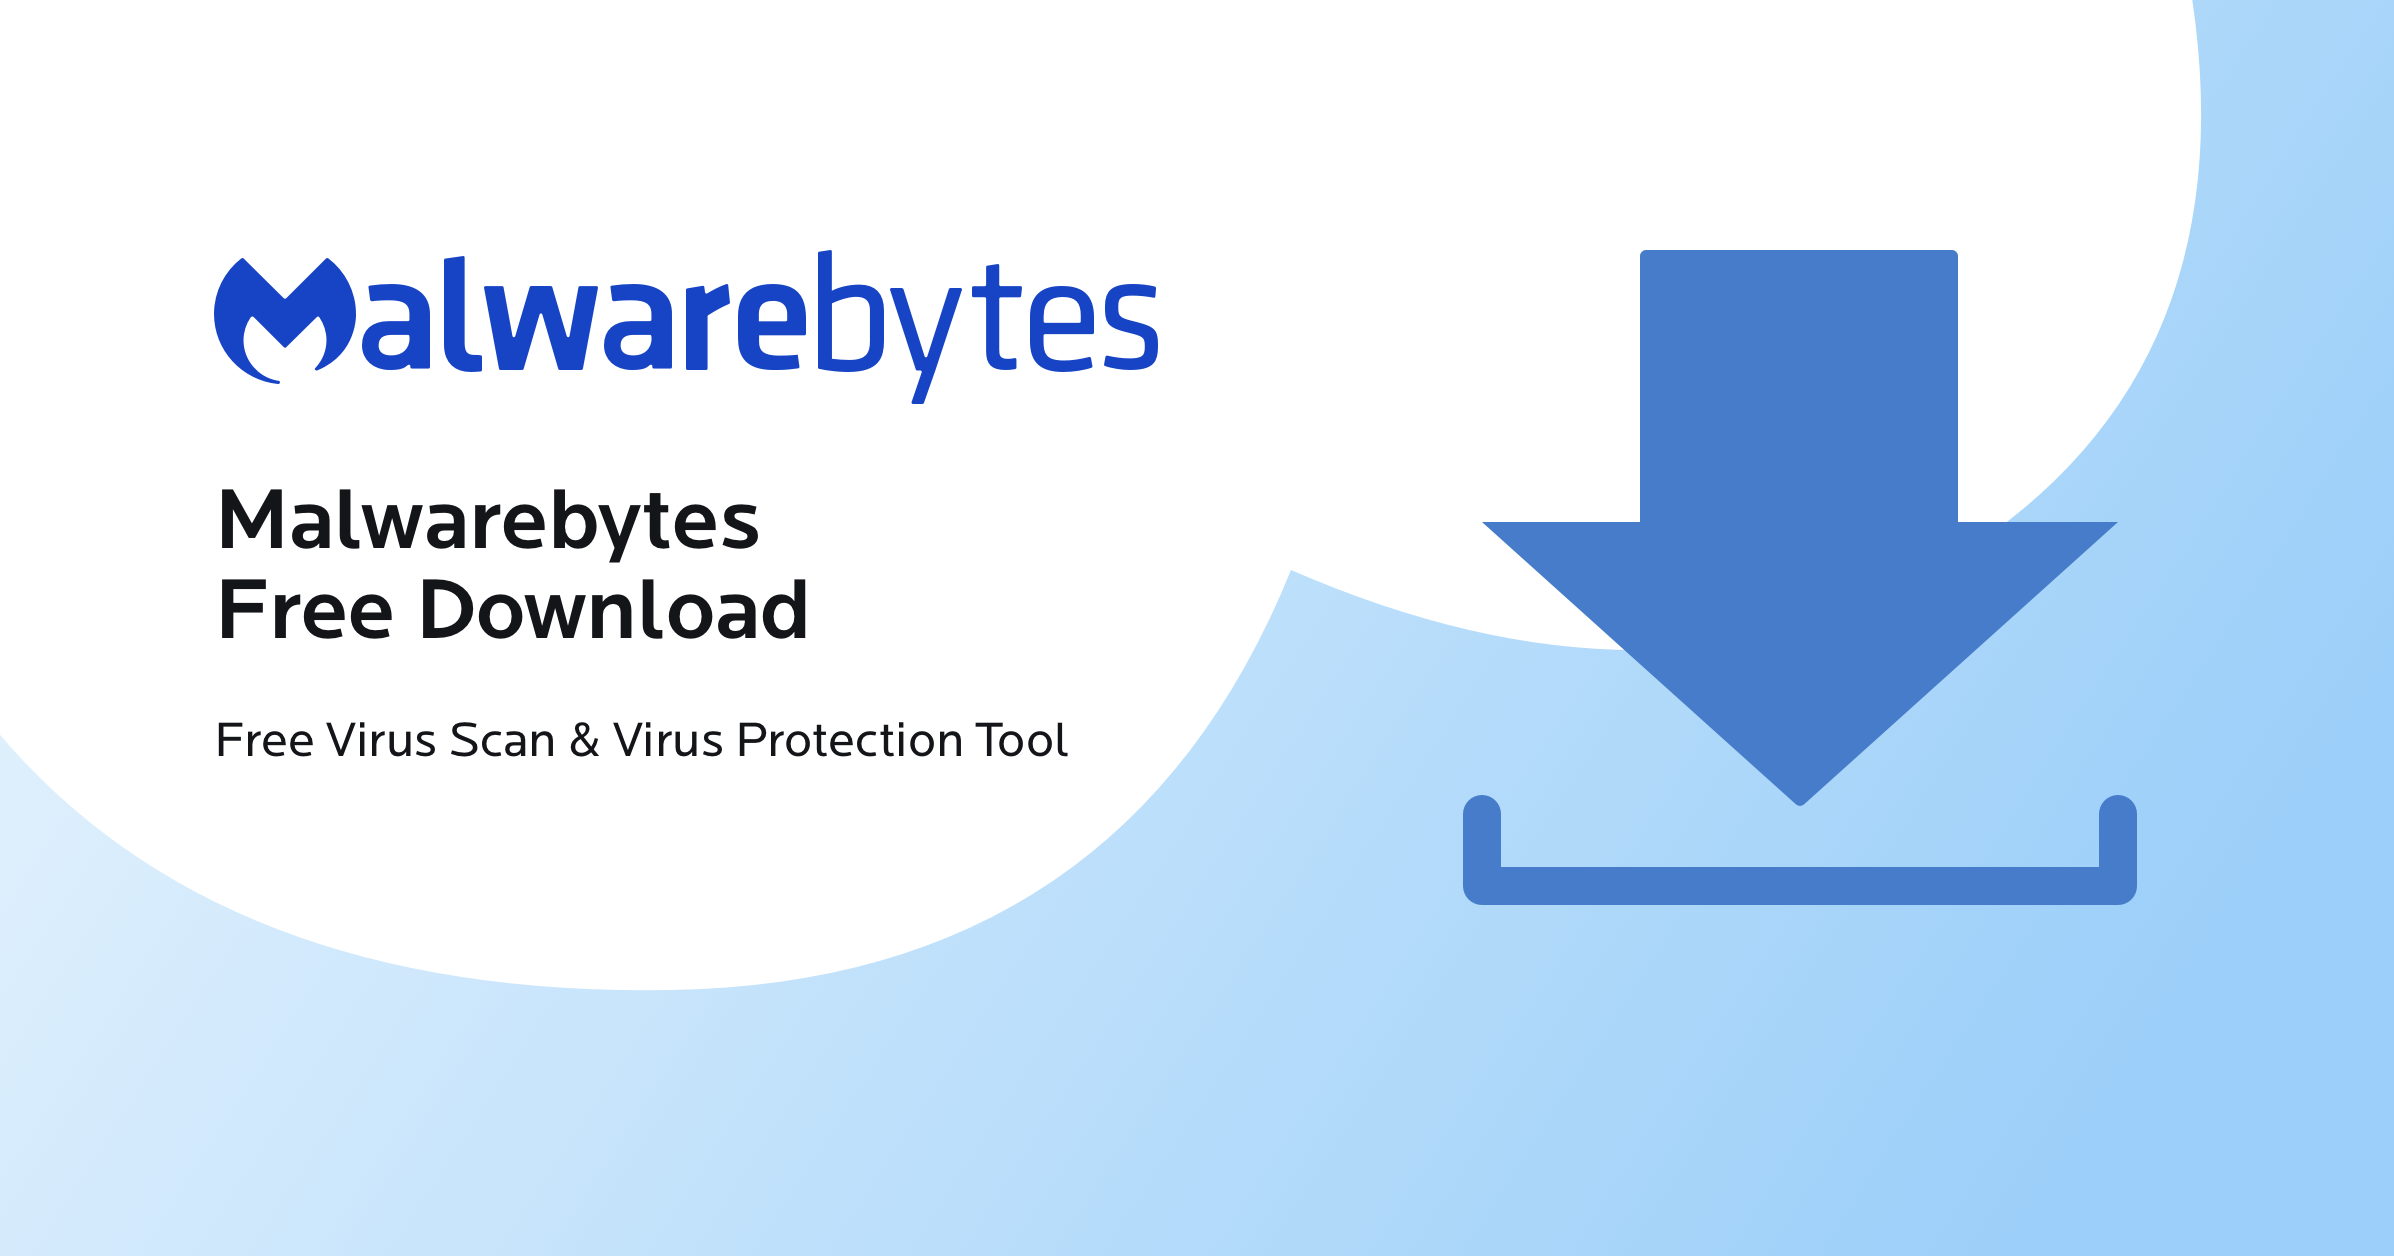 Antivirus software: Programs that can scan and remove Monika .exe malware from a computer.
Malwarebytes: A popular anti-malware tool that can effectively detect and remove Monika .exe malware.